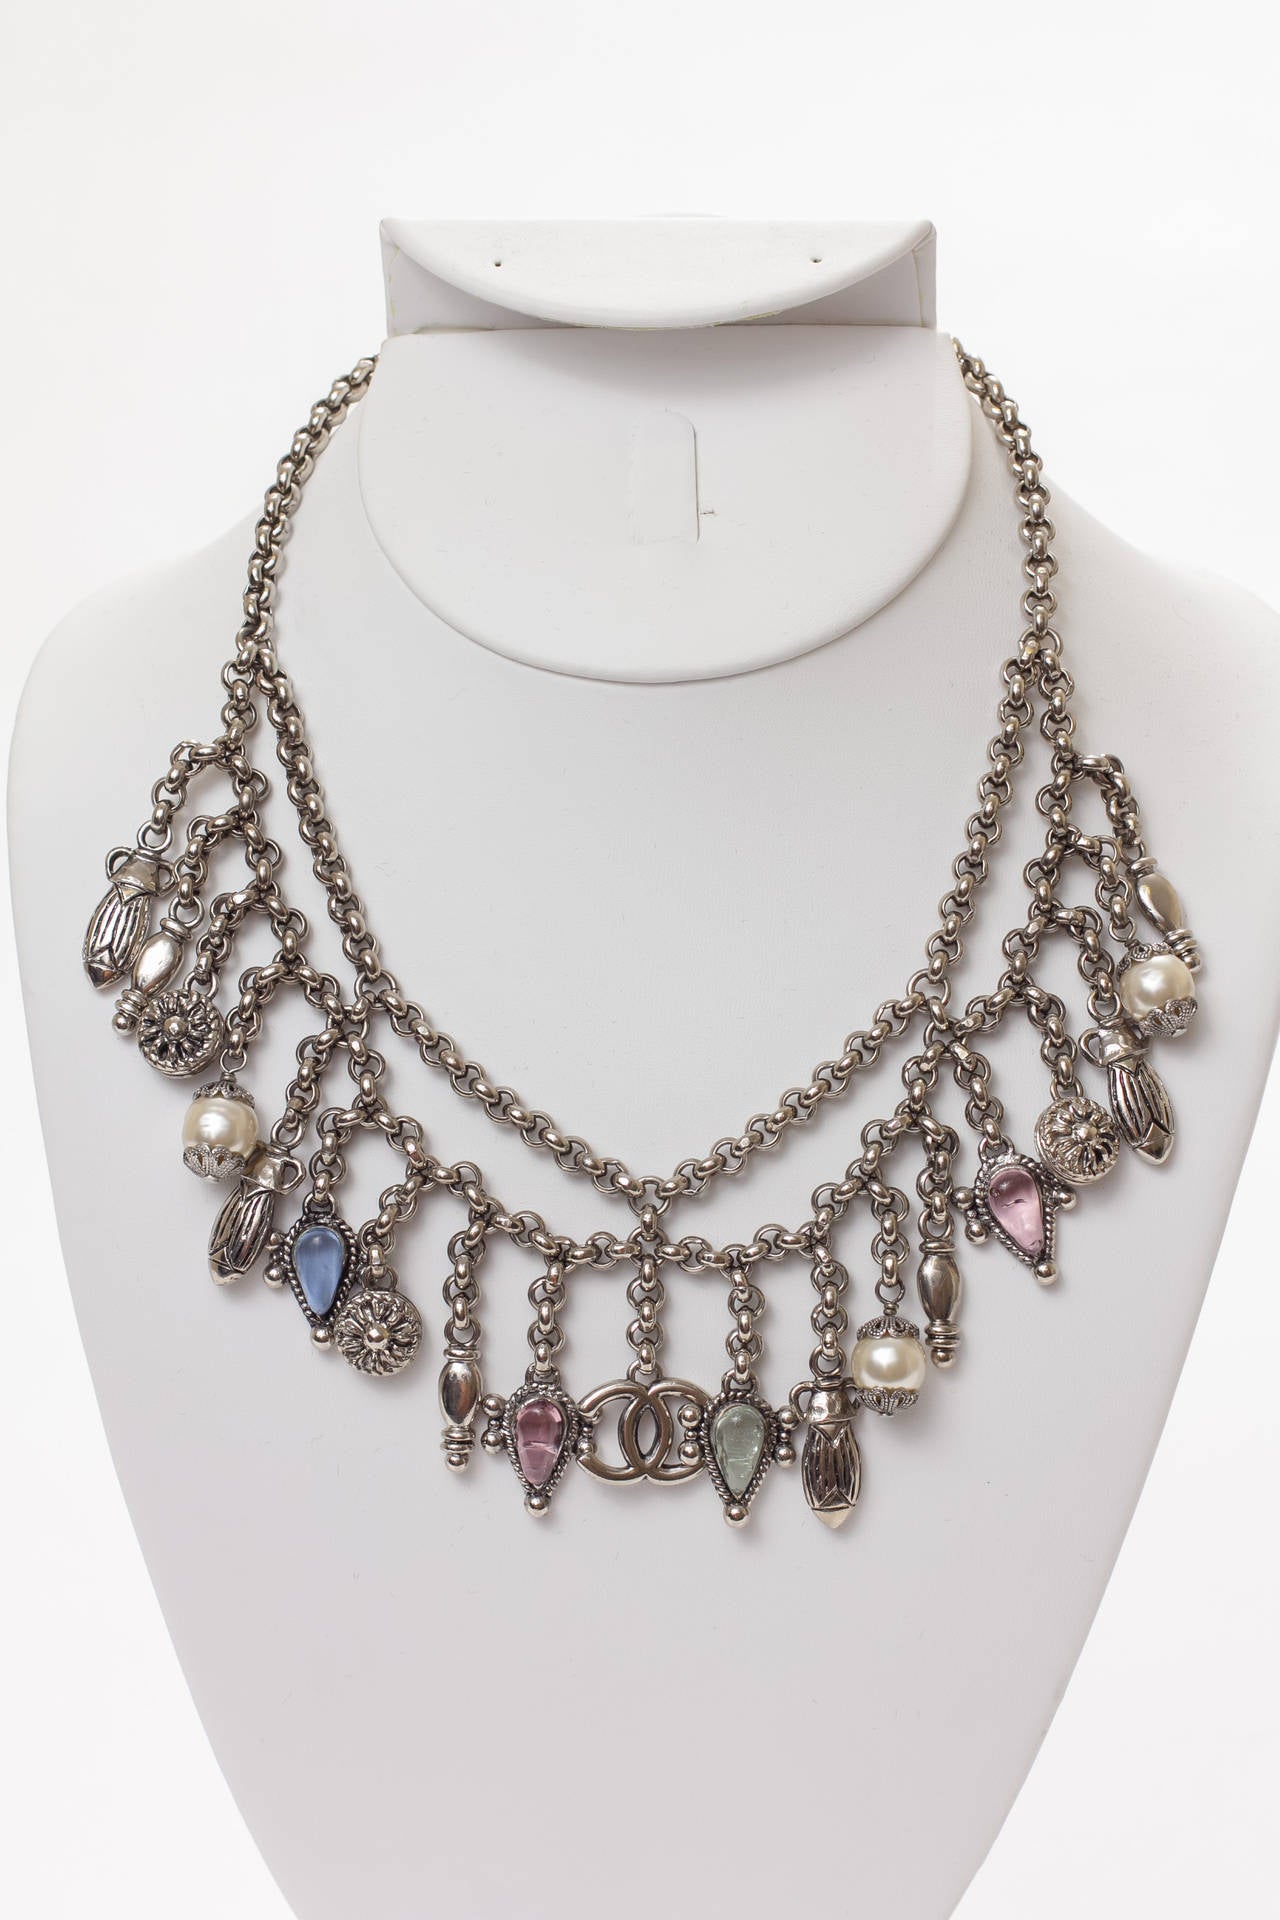 Chanel Necklace with Charms from 1998 P
Silver tone metal
Vintage piece
Excellent condition

Measurements:
16'' Long